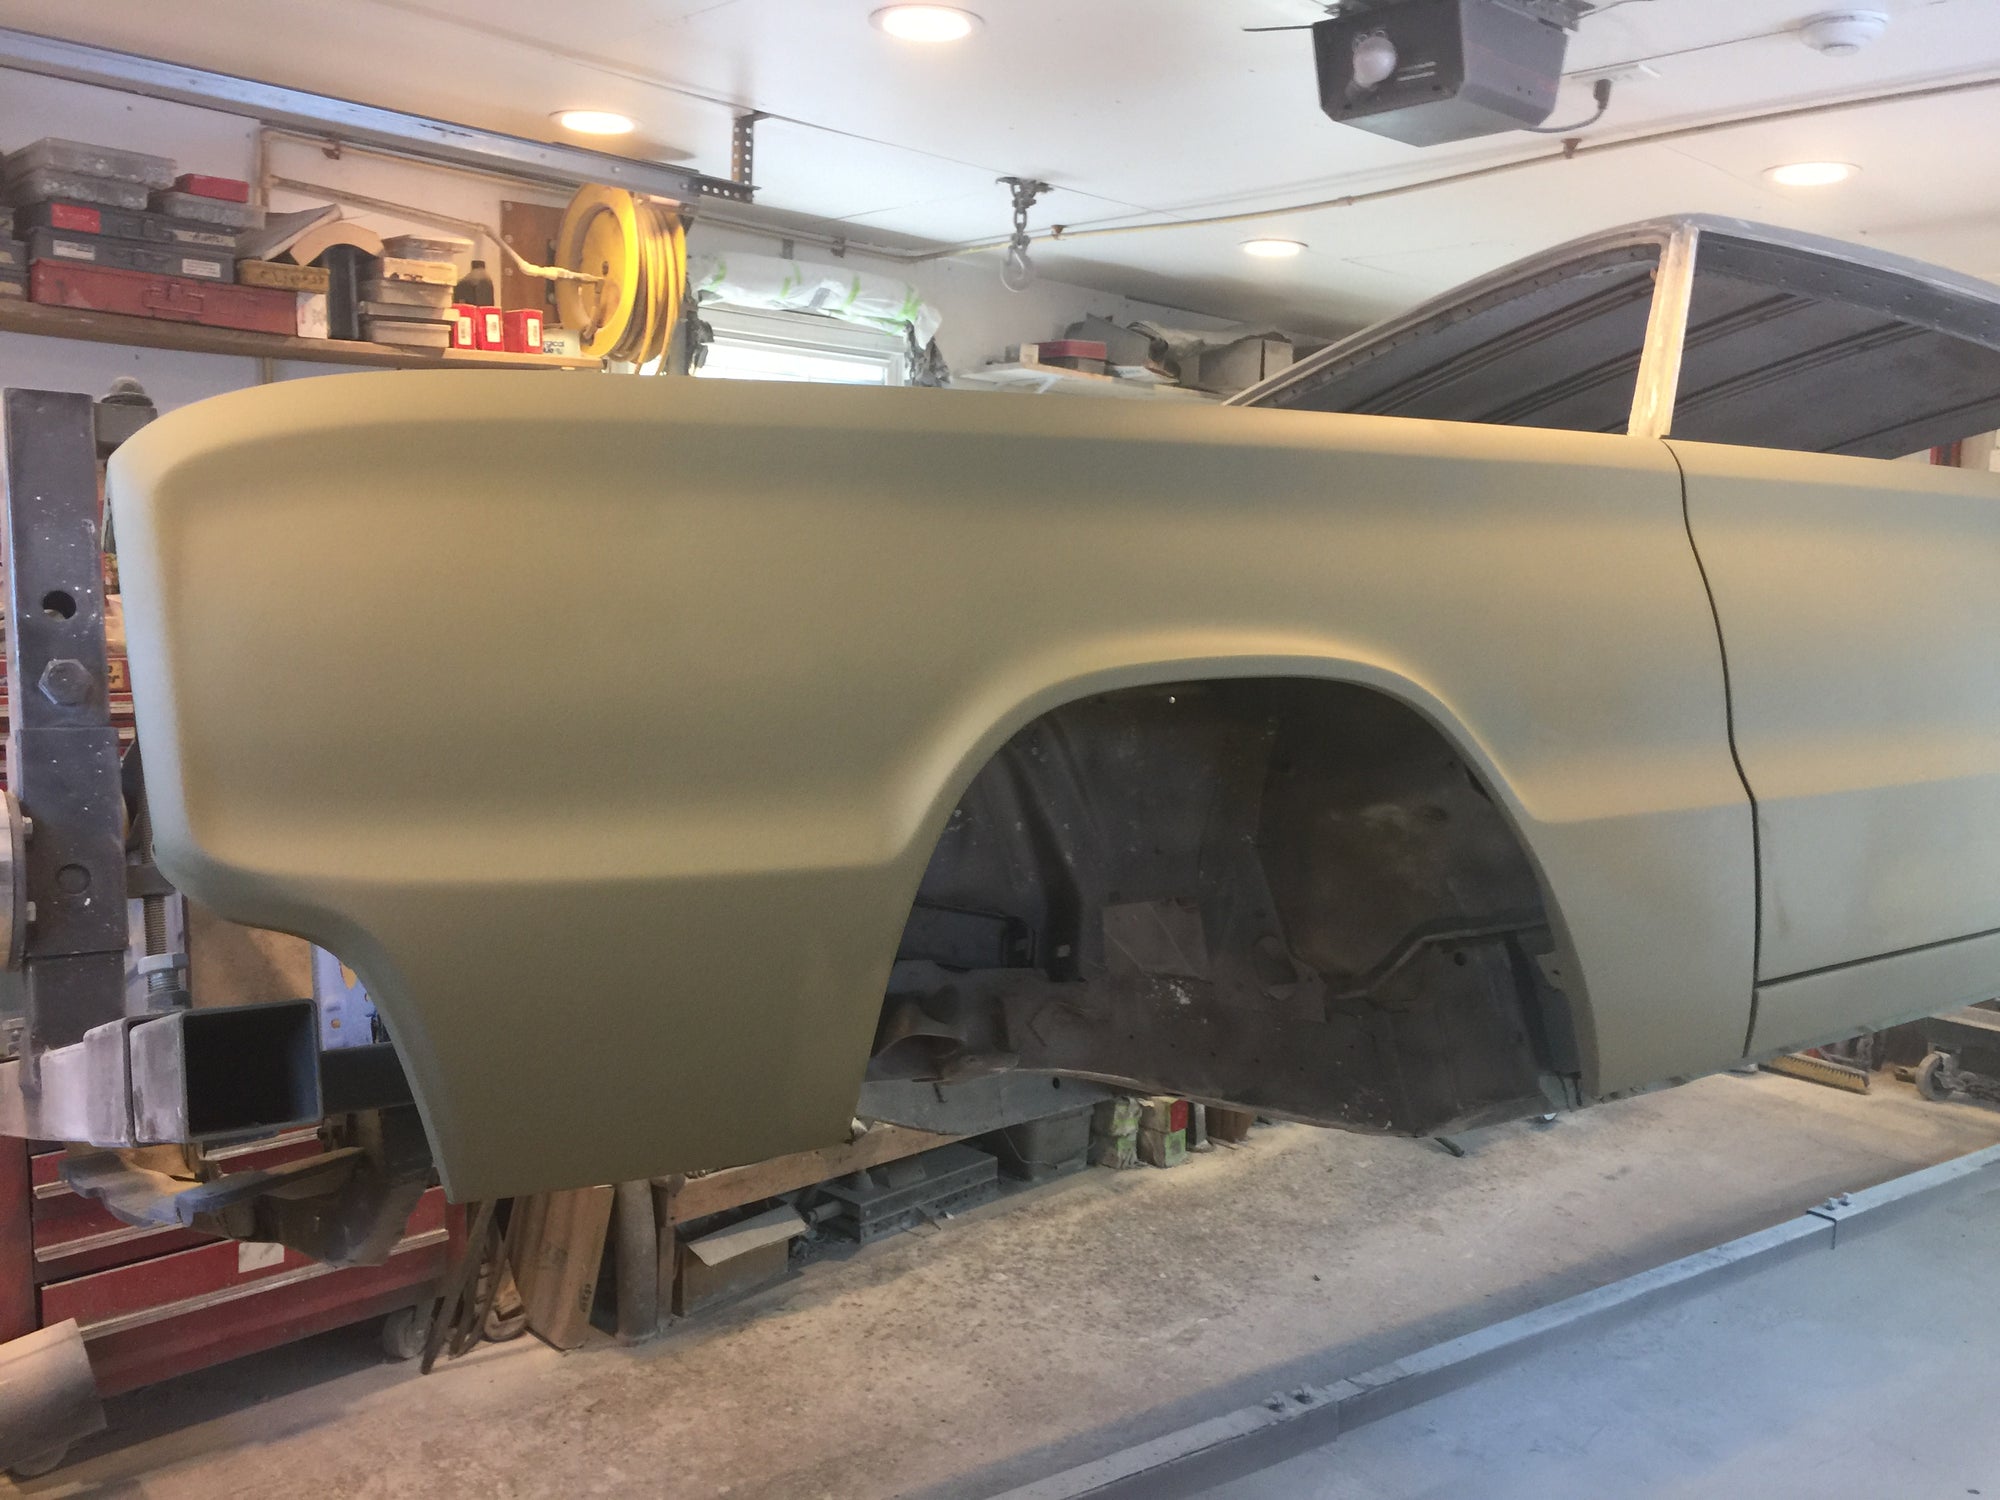 67 Charger Fenders Done!  Roof Next!